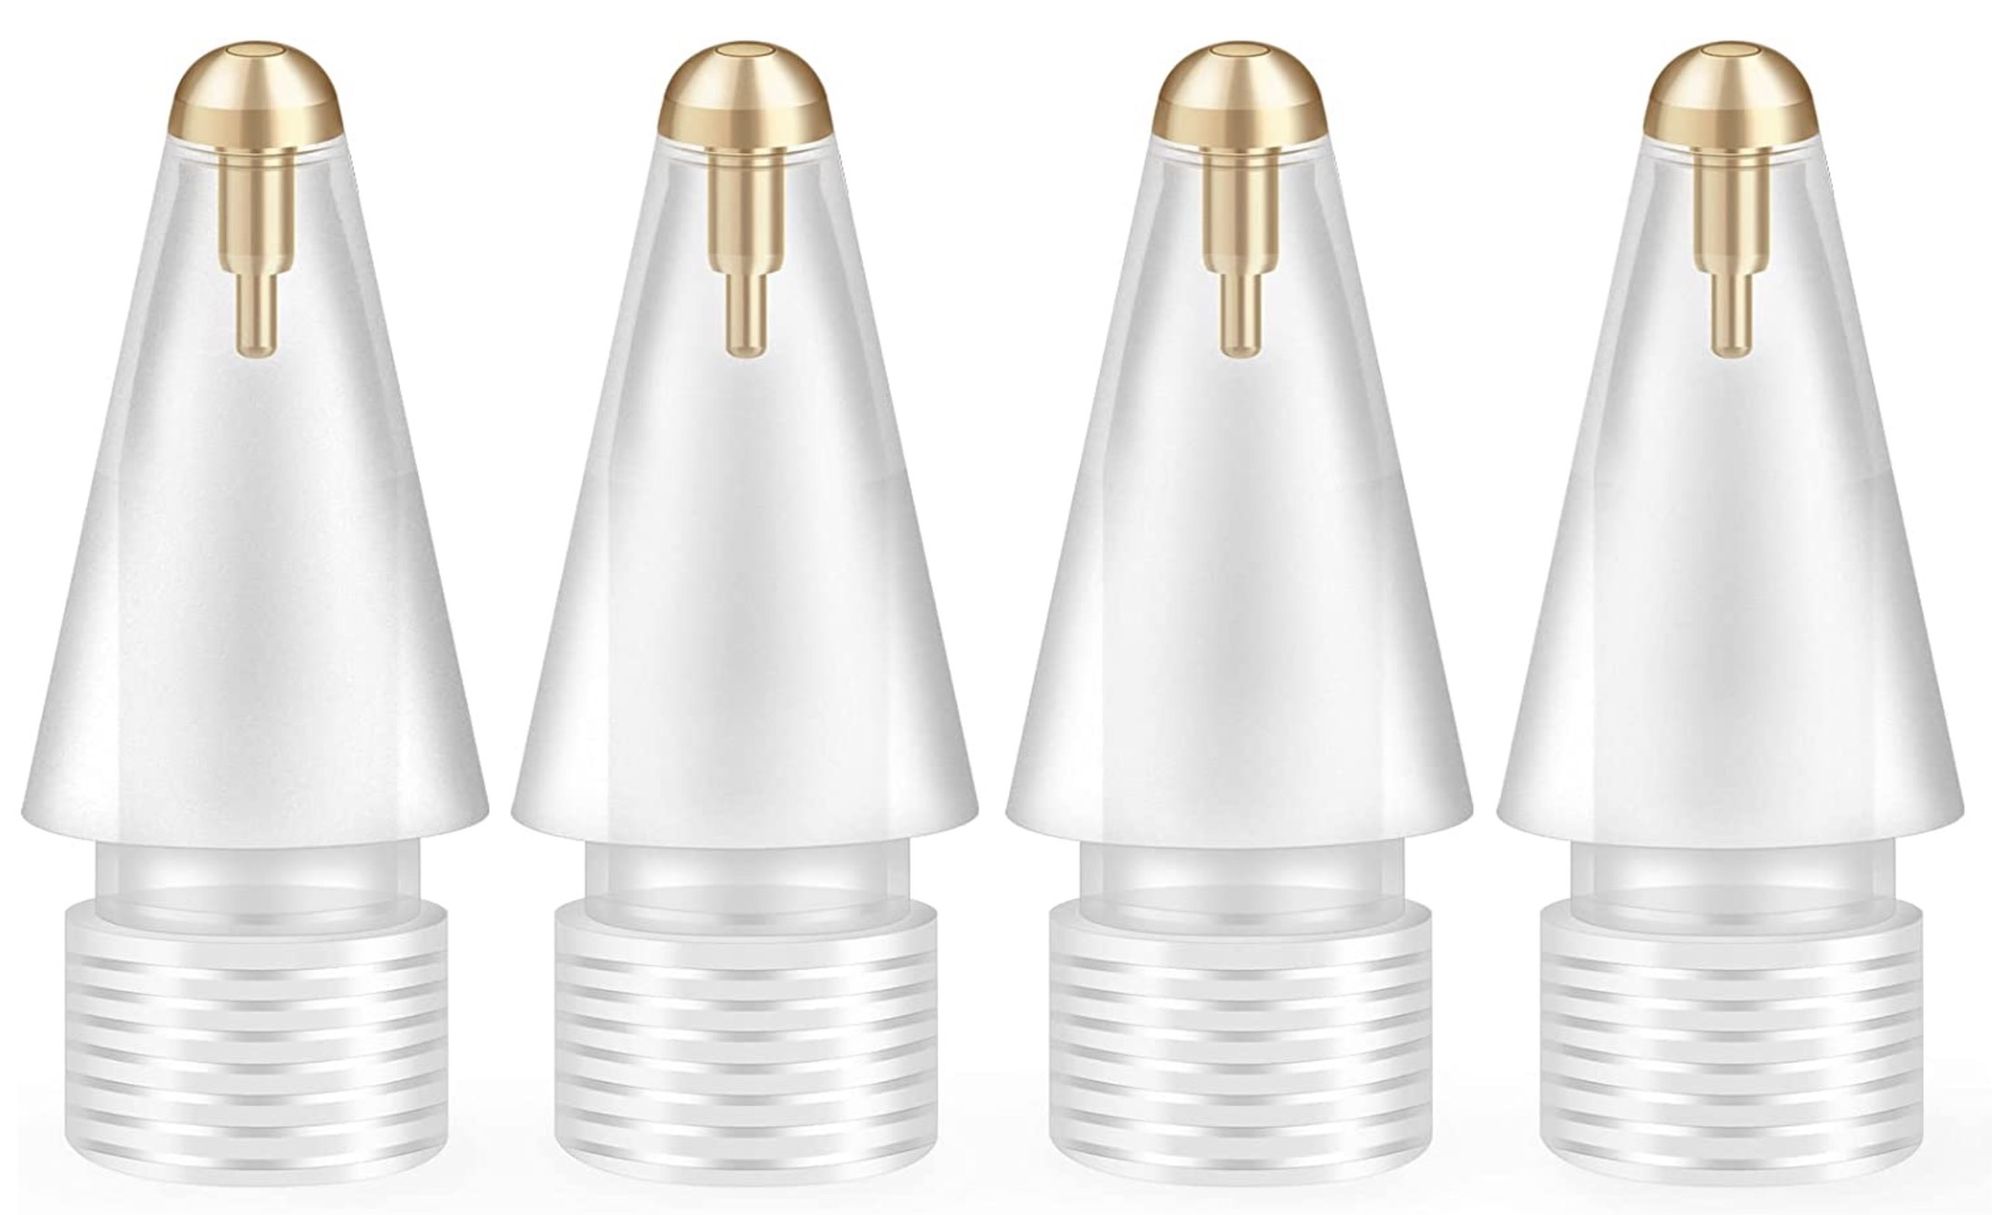 4. MEKO transparent pen replacement nibs for Apple Pencil 1 and 2